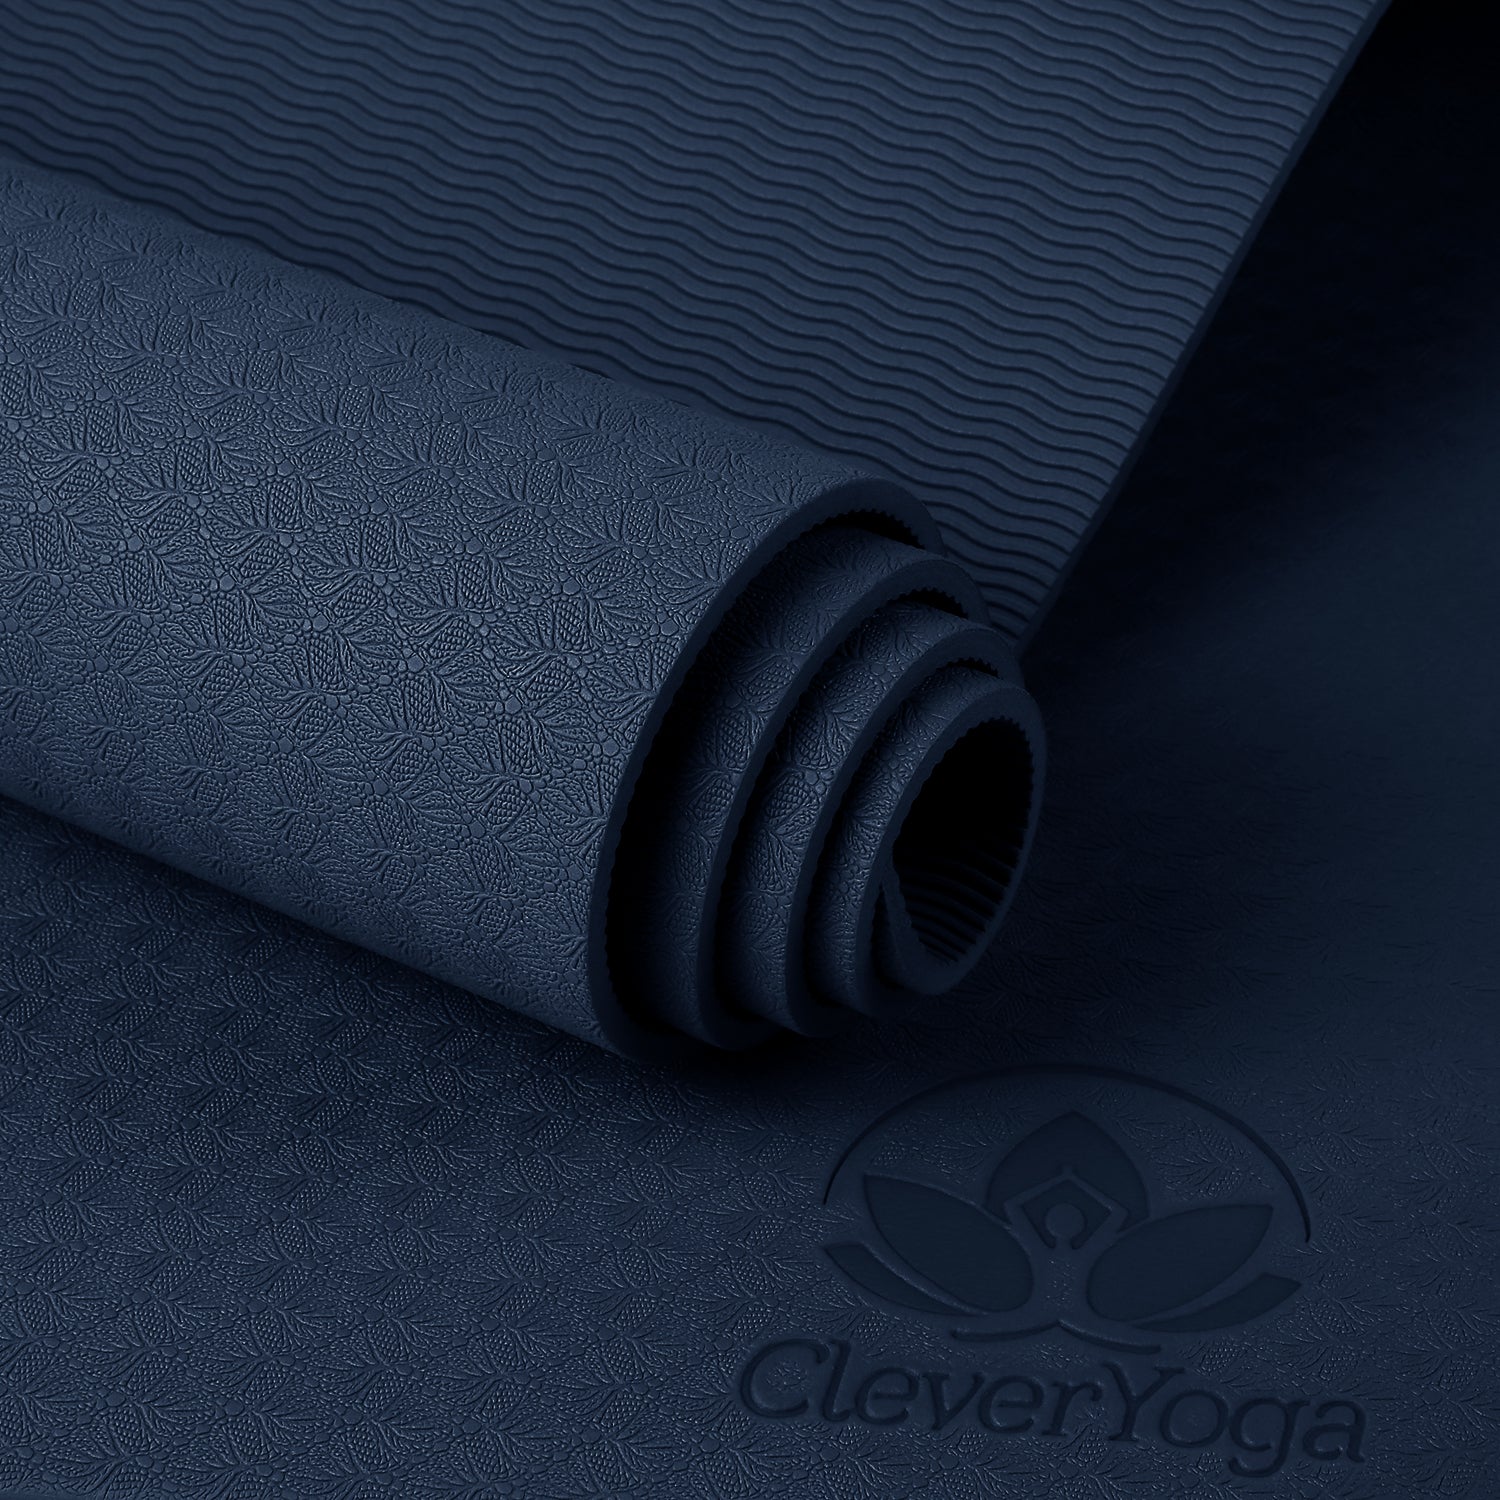 Clever Yoga: 8,703 Reviews of 26 Products 